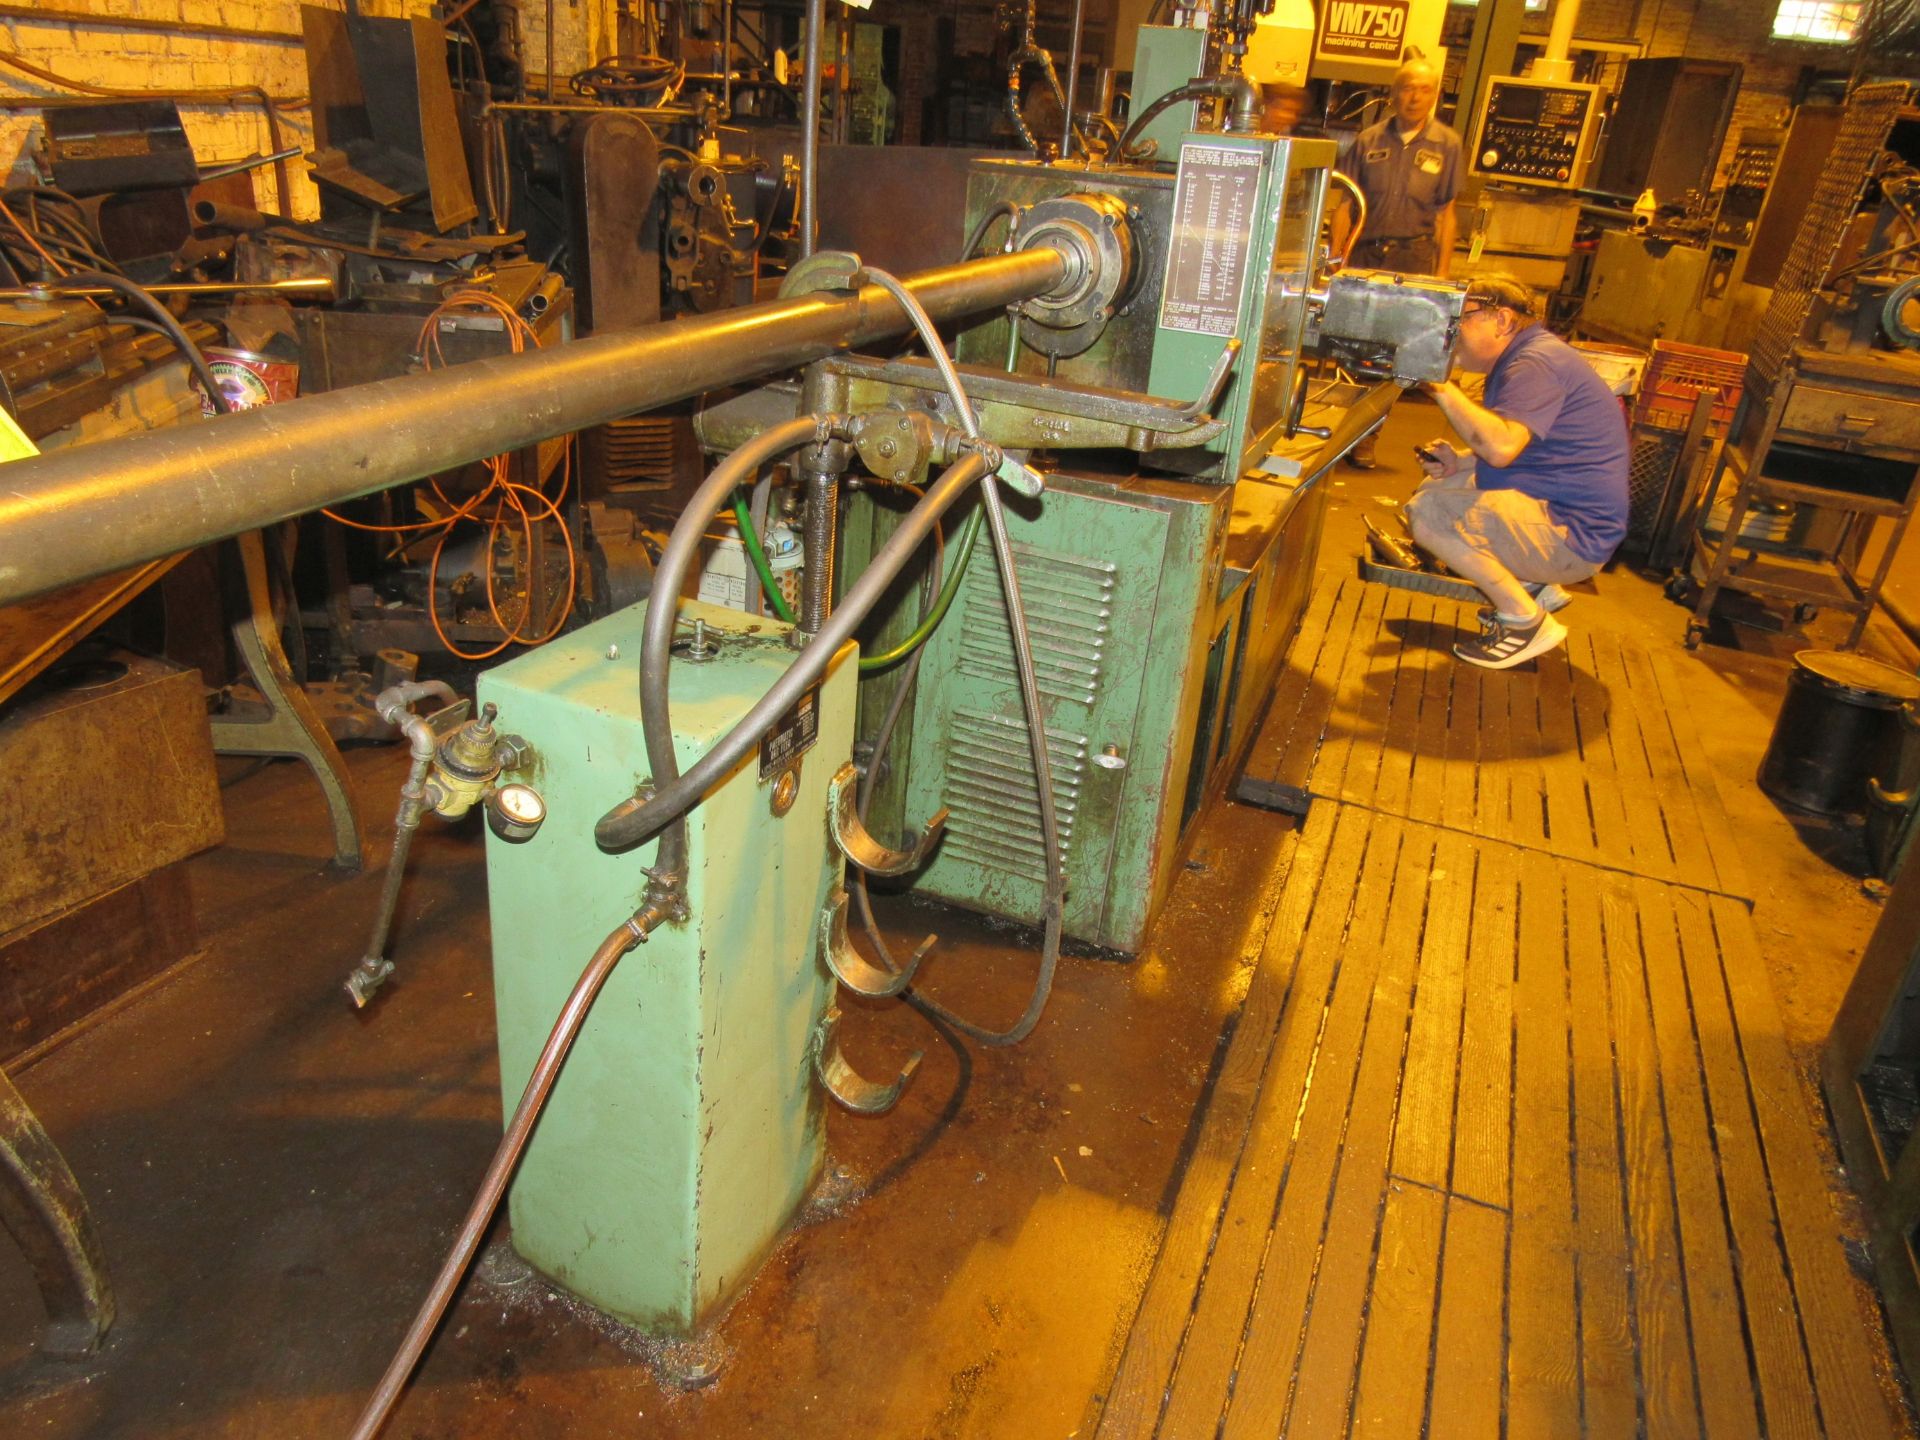 Logan model 450 collet lathe, 15" swing, 4' bed, tool post, tool turret, collet closing chuck - Image 5 of 7